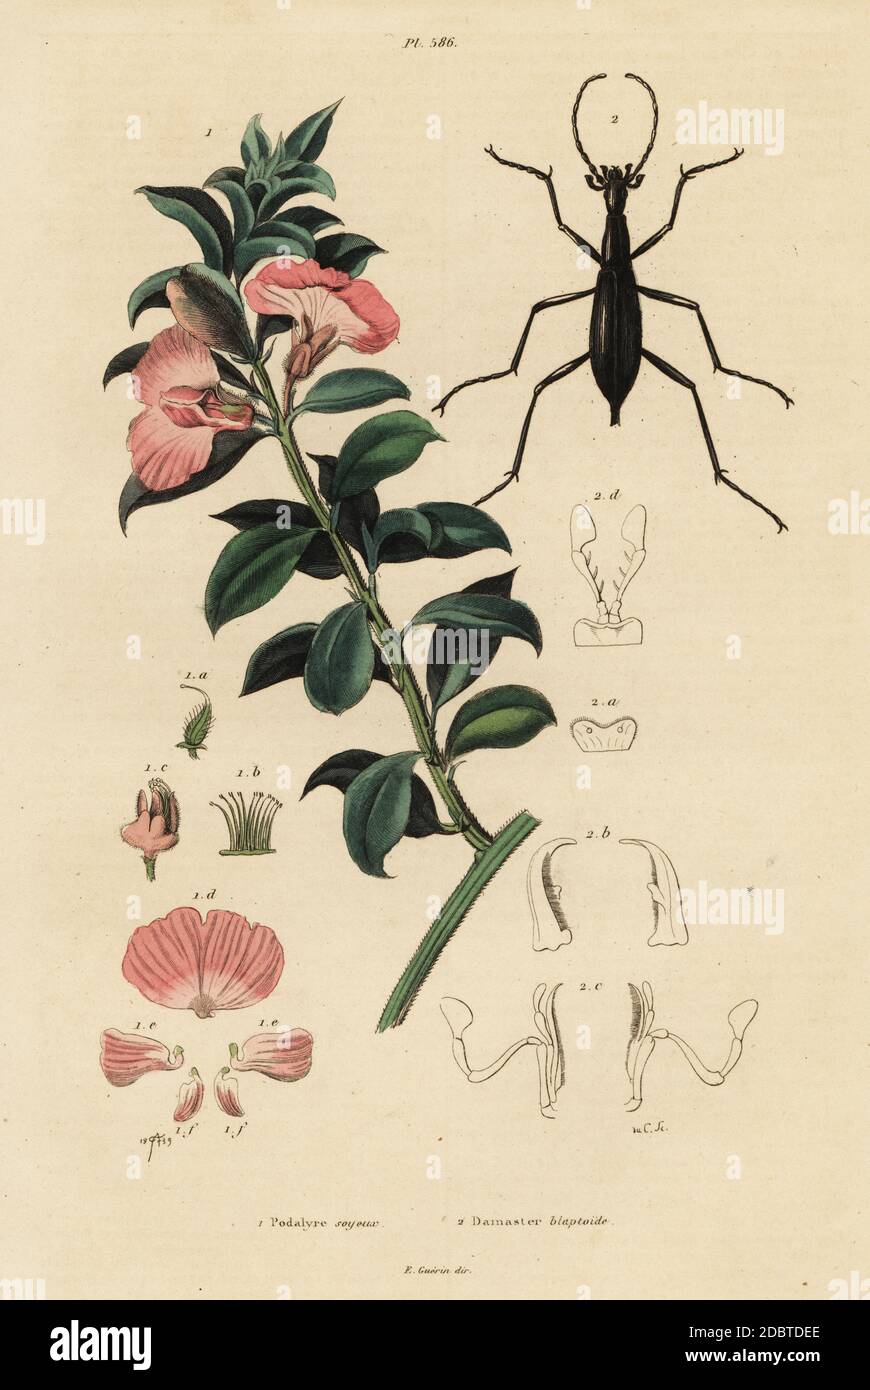 Cape satin bush, Podalyria sericea, and beetle, Carabus blaptoides (Damaster blaptoides). Handcoloured steel engraving by du Casse after an illustration by Adolph Fries from Felix-Edouard Guerin-Meneville's Dictionnaire Pittoresque d'Histoire Naturelle (Picturesque Dictionary of Natural History), Paris, 1834-39. Stock Photo